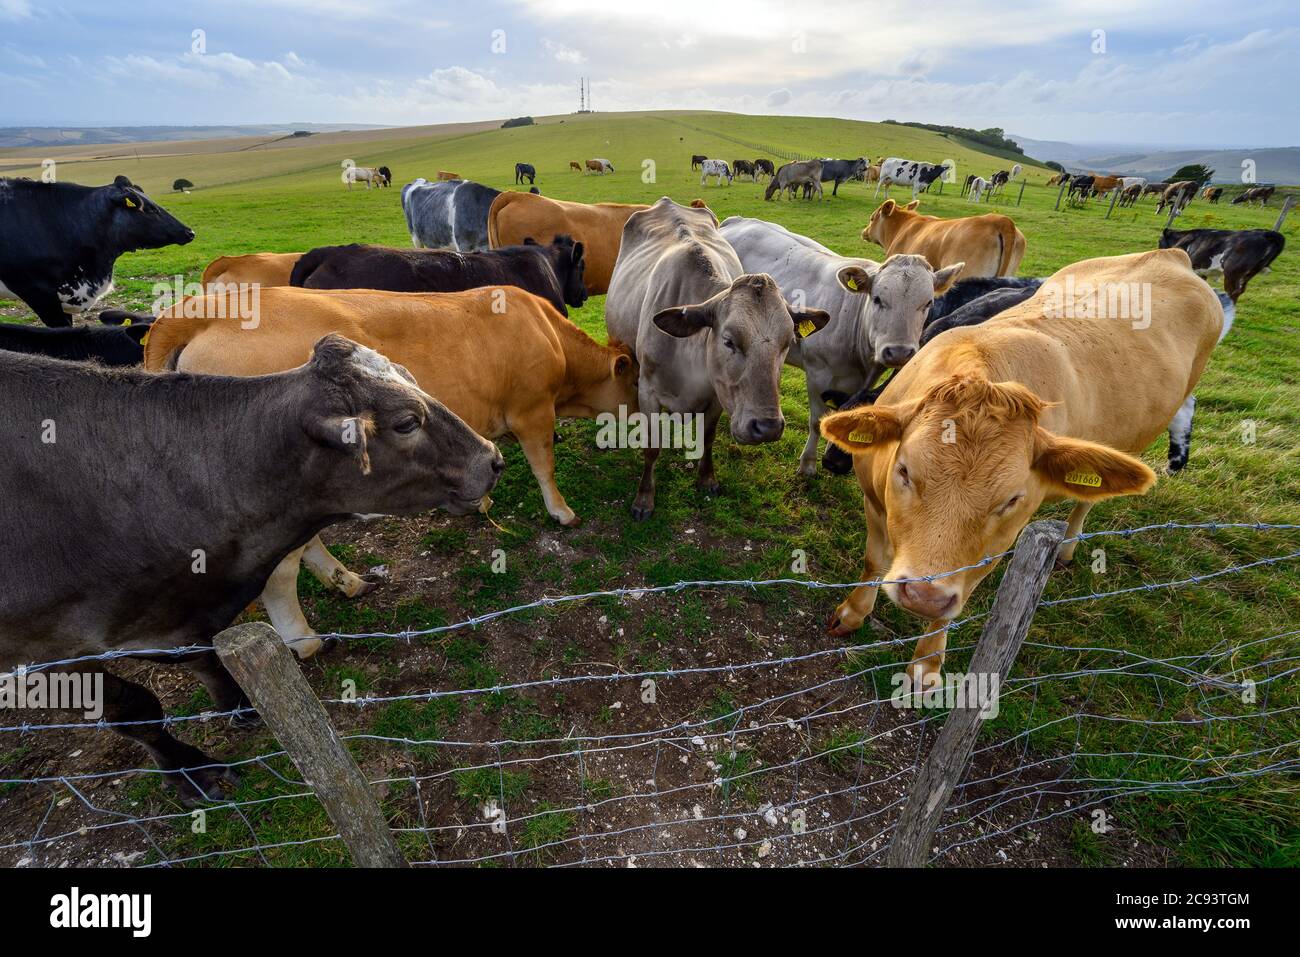 South Downs National Park, Sussex, England, UK. Cows on a farm on the South Downs Way near Firle Beacon and Newhaven. Stock Photo